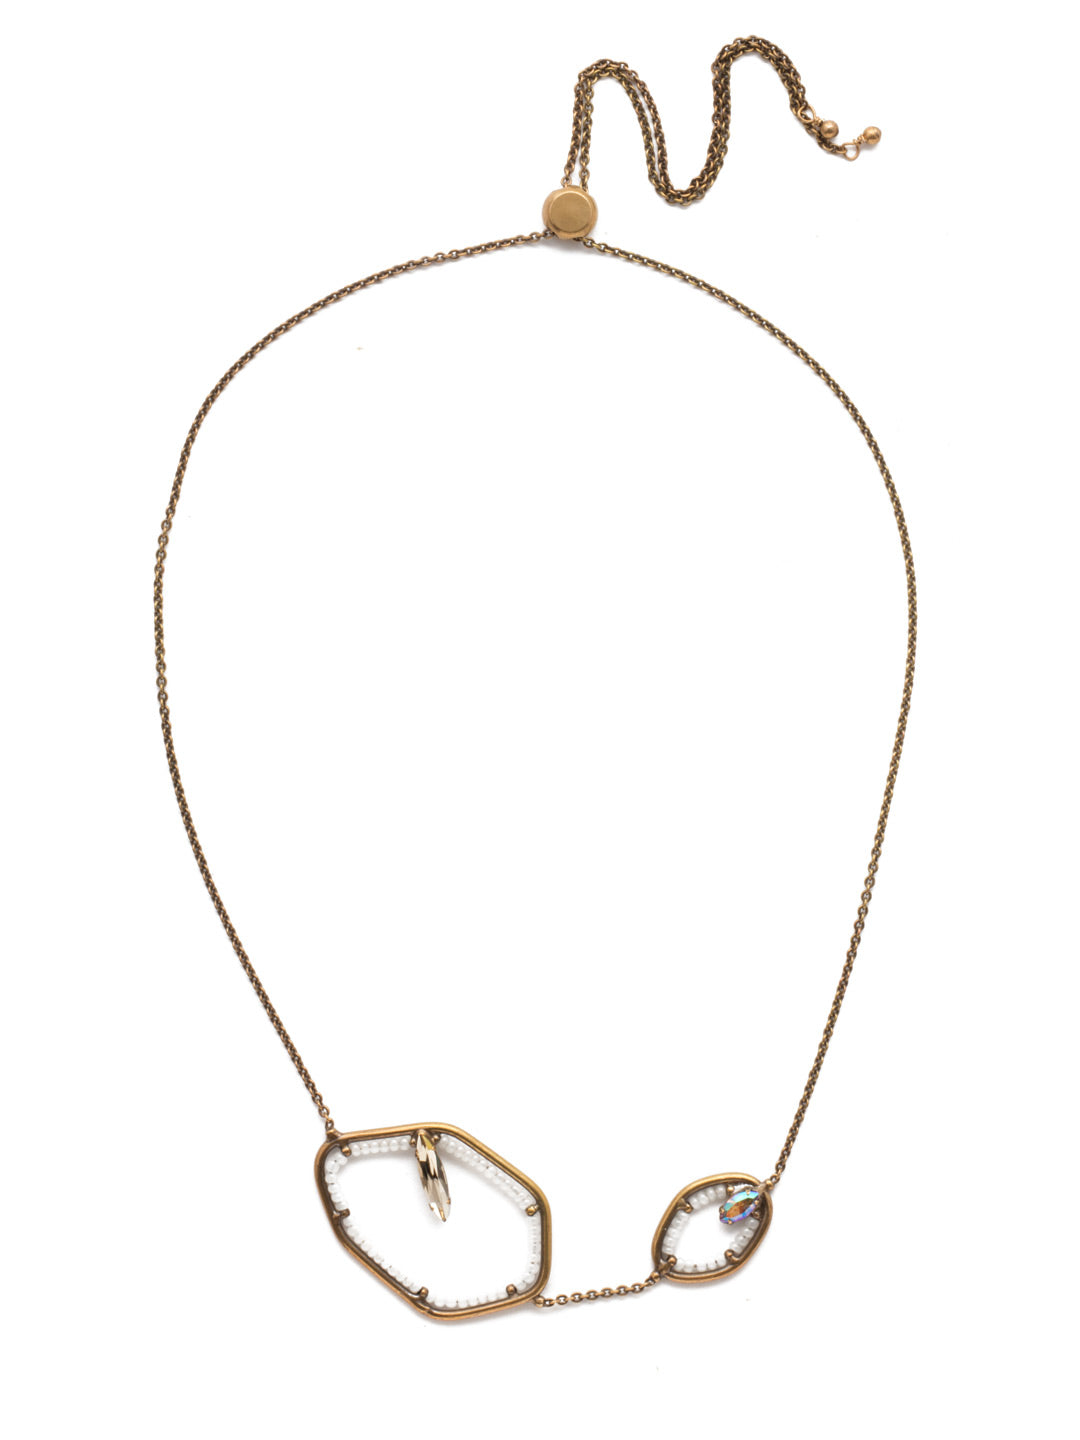 Aphelia Statement Necklace - NEK16AGROB - <p>Looking for a statement piece? Grab this architectural beauty featuring navette-shaped crystals and delicate beadwork on a slider chain statement necklace. From Sorrelli's Rocky Beach collection in our Antique Gold-tone finish.</p>